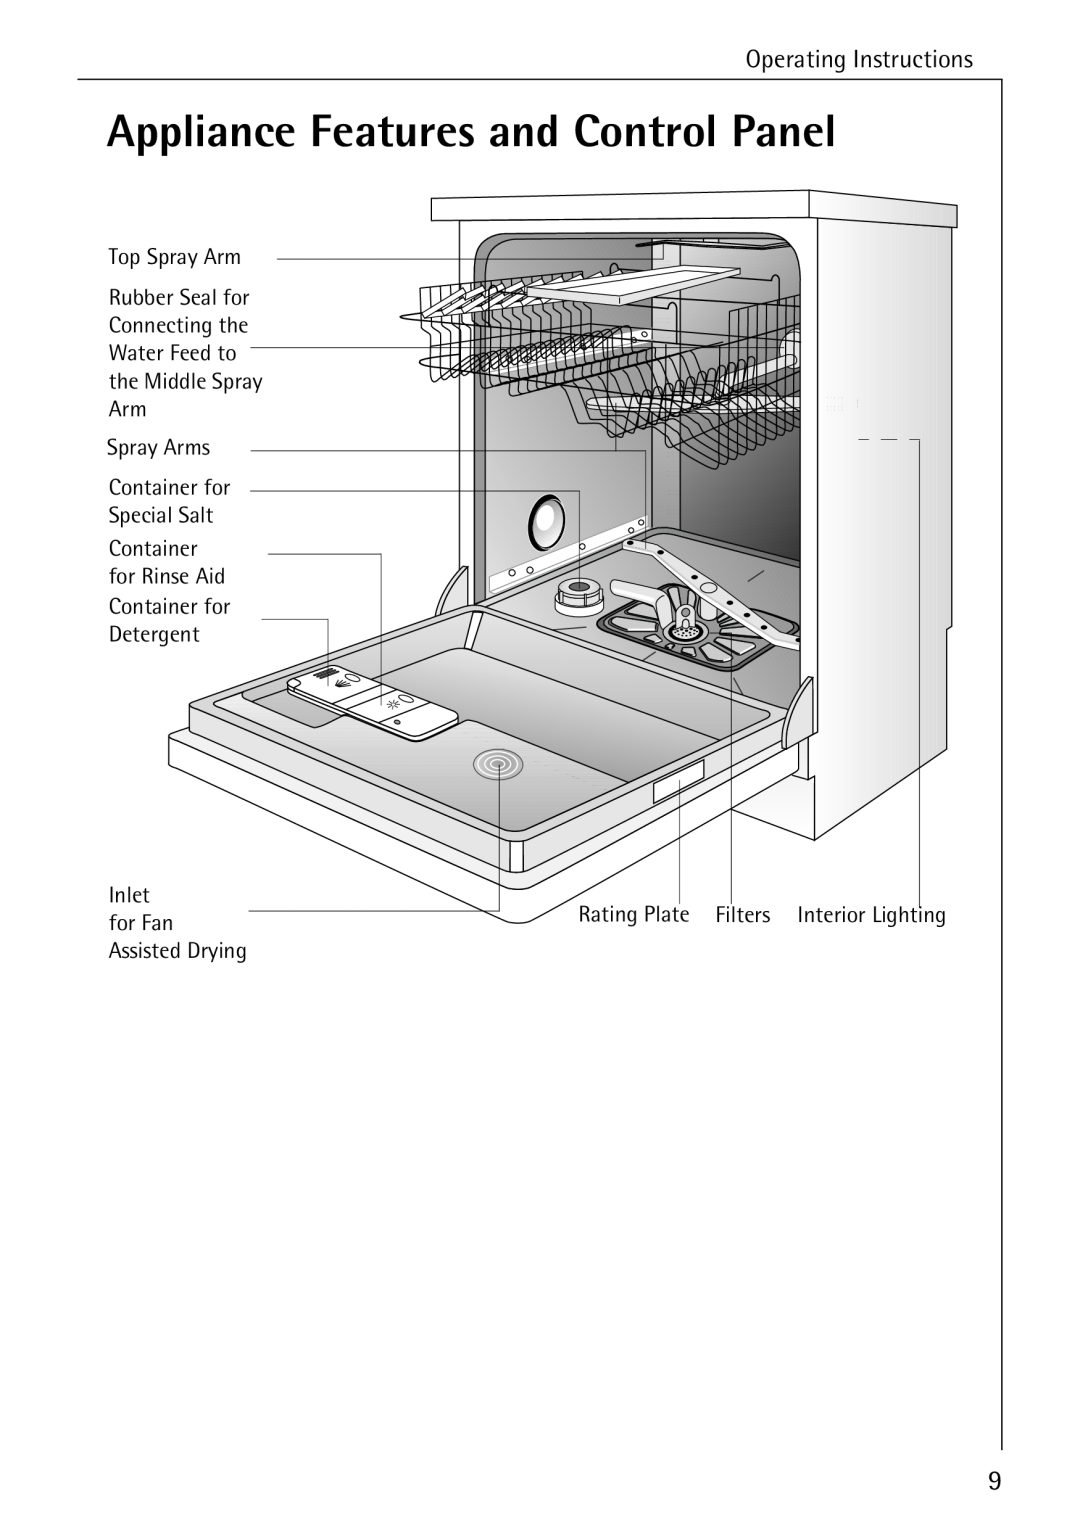 AEG 80850 I manual Appliance Features and Control Panel 